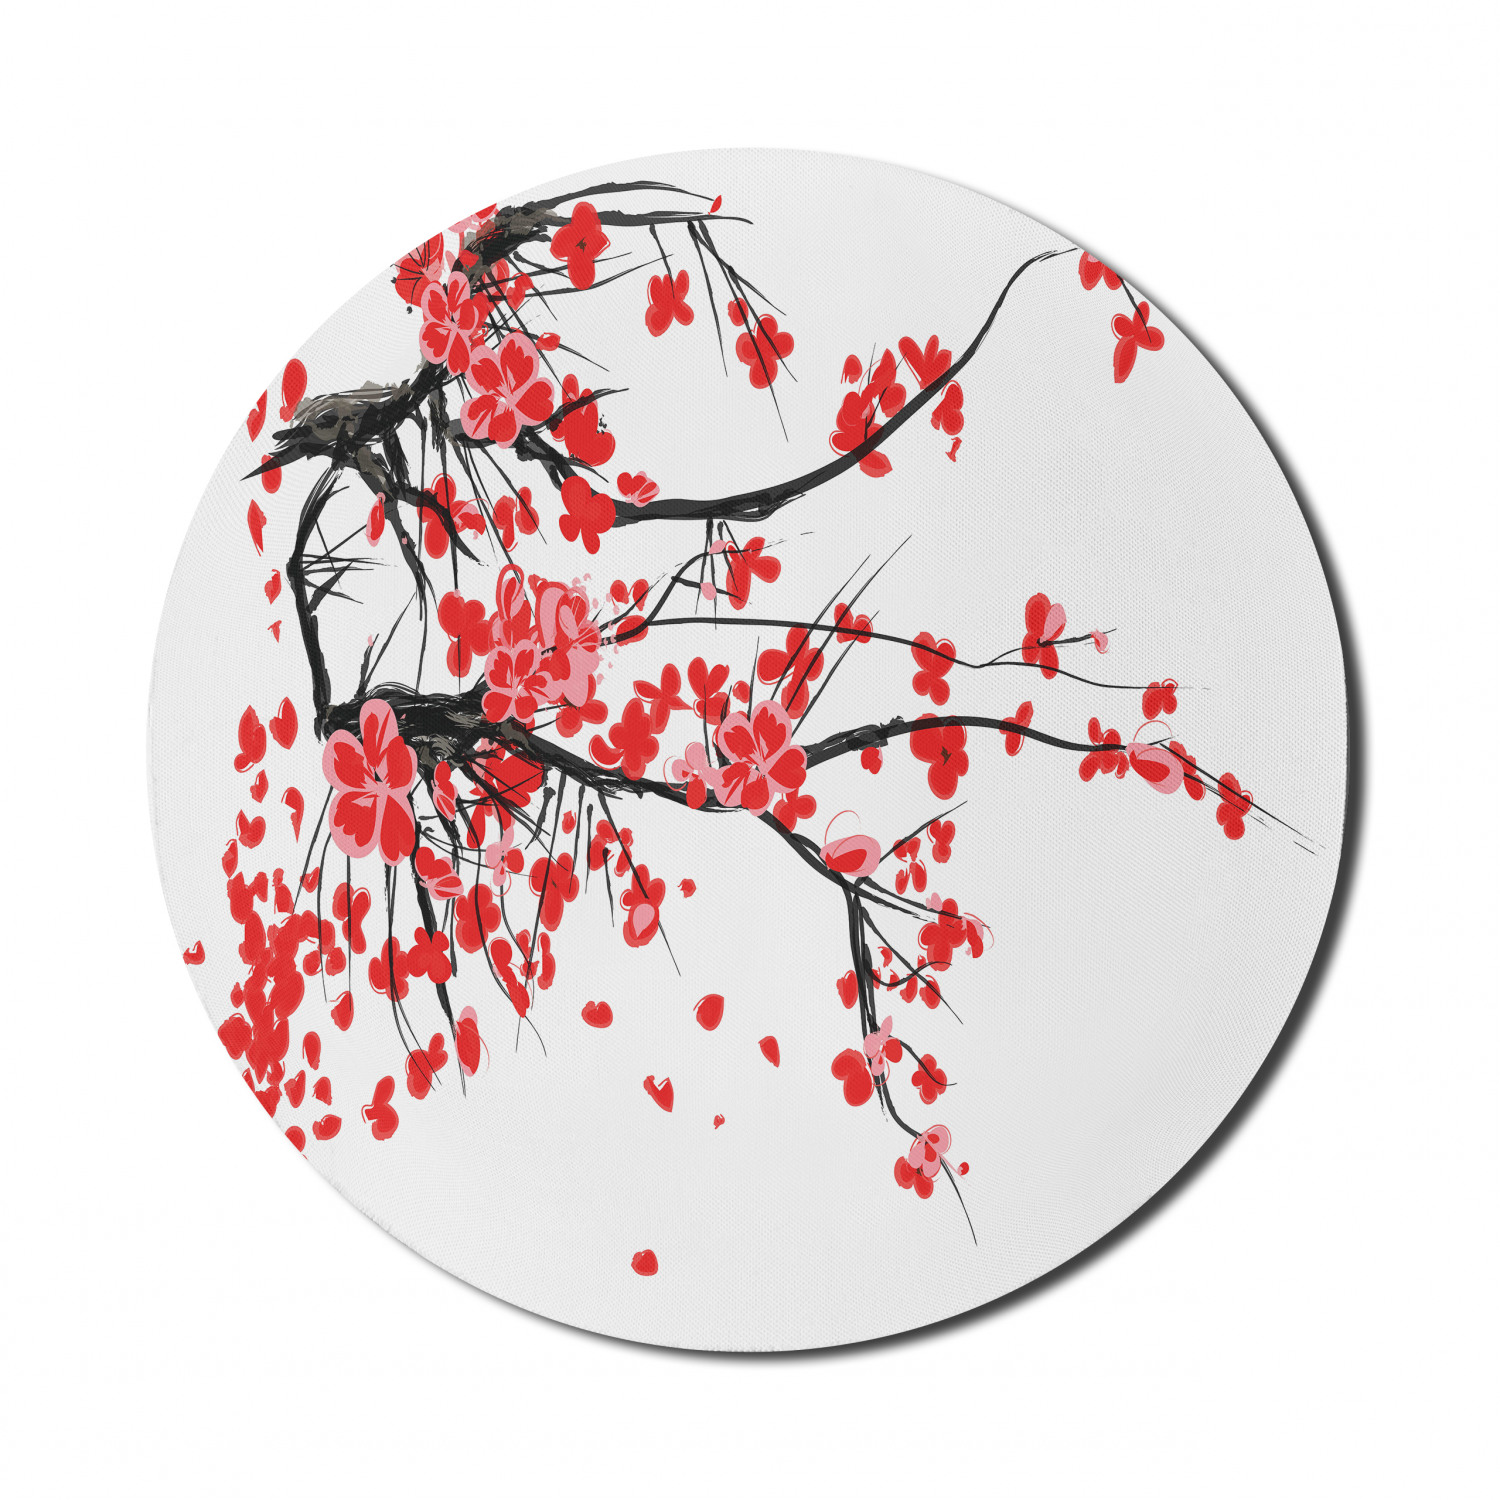 Floral Mouse Pad for Computers, Japanese Cherry Blossom Sakura Blooms Branch Spring Inspirations Print, Round Non-Slip Thick Rubber Modern Mousepad, 8" Round, Vermilion Brown White, by Ambesonne - image 1 of 2